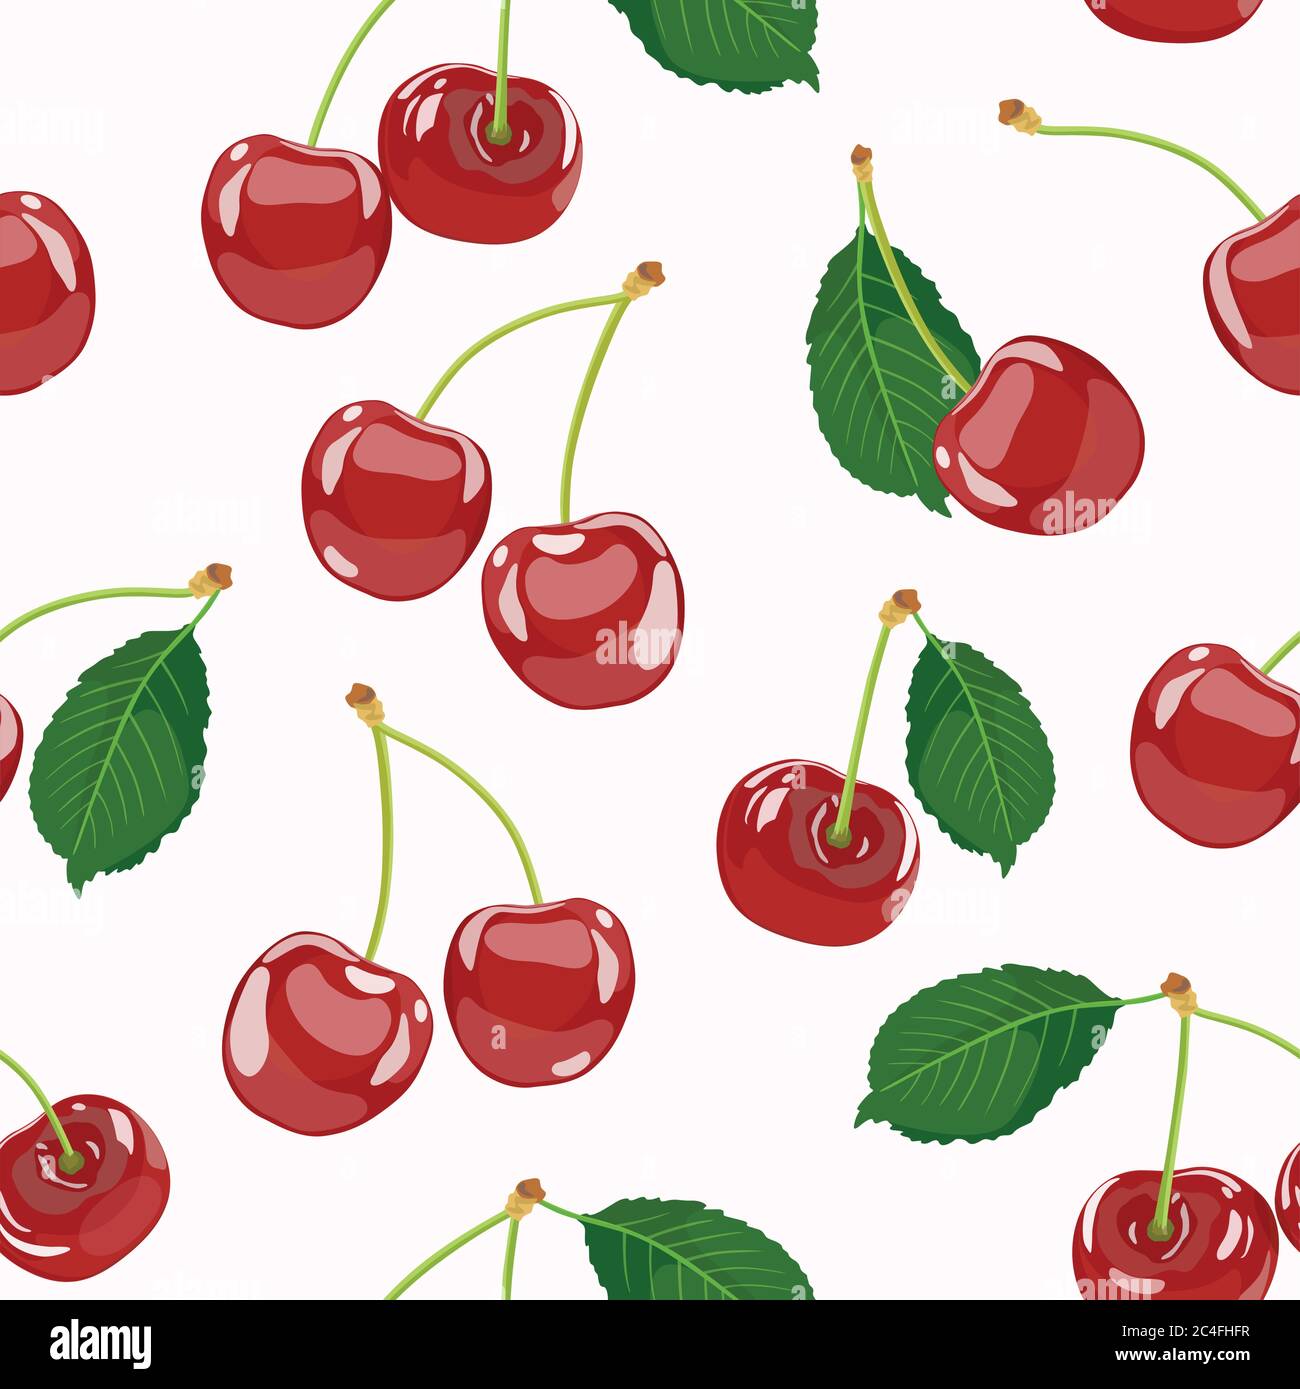 Seamless pattern with ripe cherries. Berry bunches. Vector illustration Stock Vector